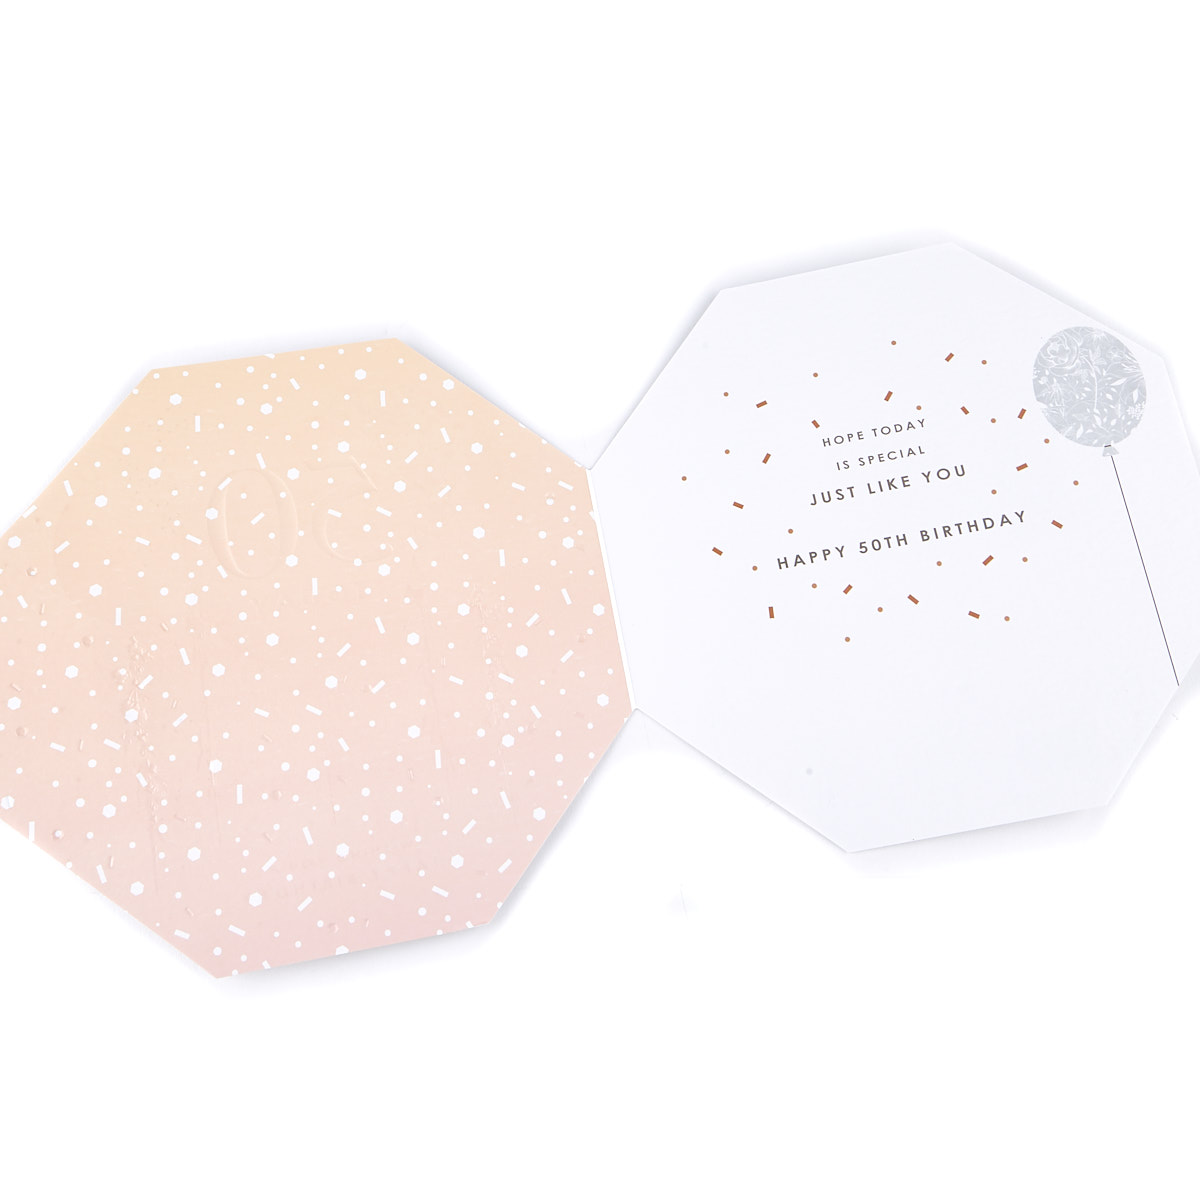 Platinum Collection 50th Birthday Card - Octagon, Rose Gold Balloons